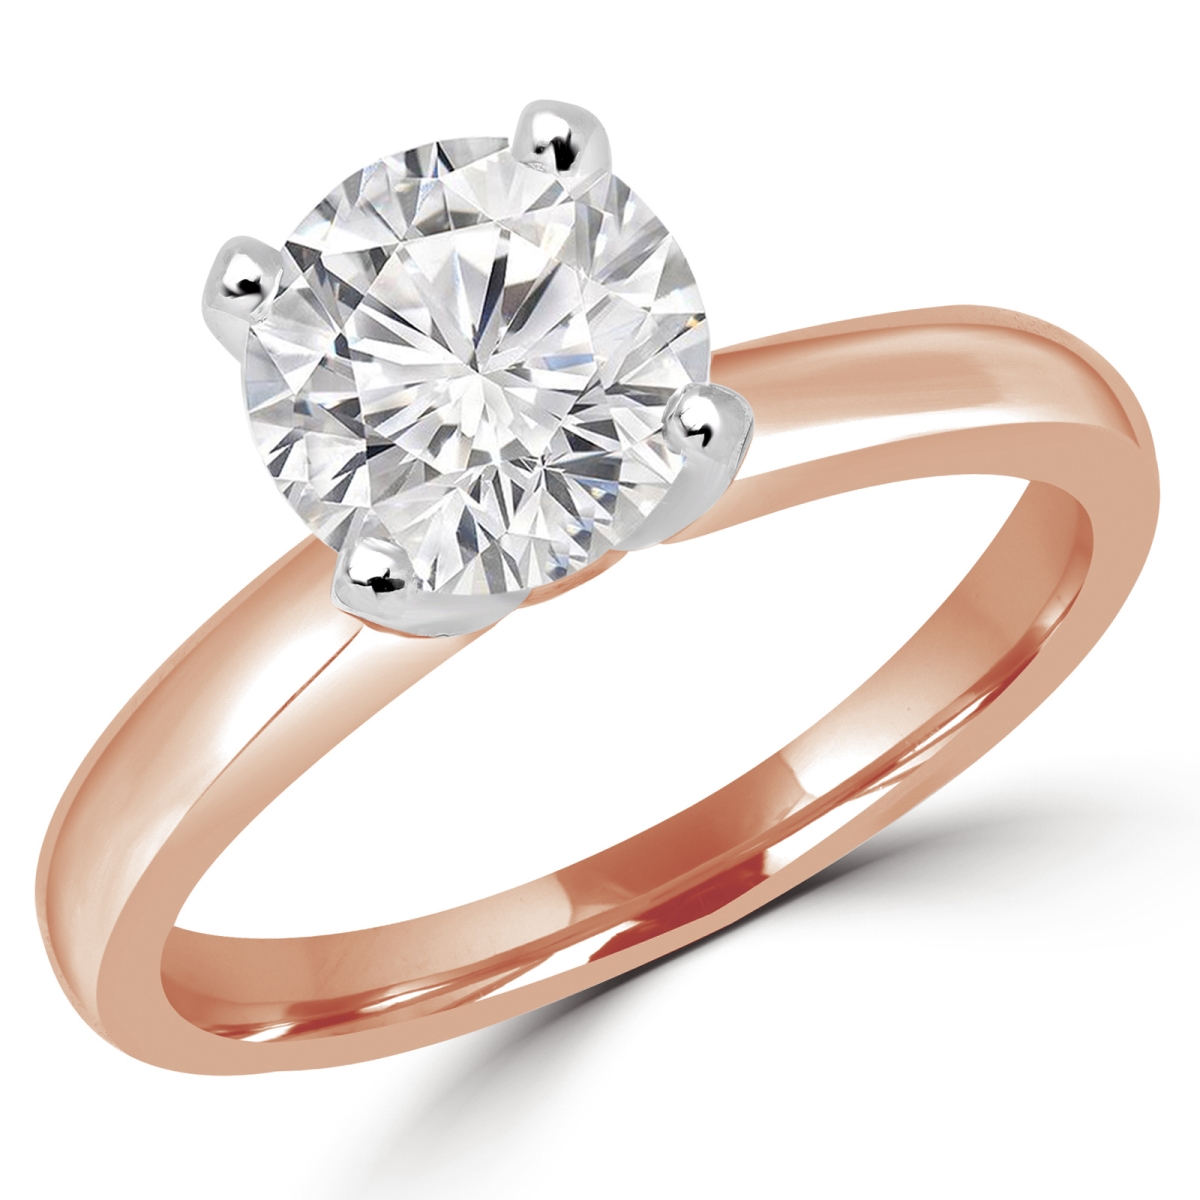 Picture of Majesty Diamonds MD180009-6.75 0.6 CT Round Diamond Solitaire Engagement Ring in 14K Rose Gold - Size 6.75